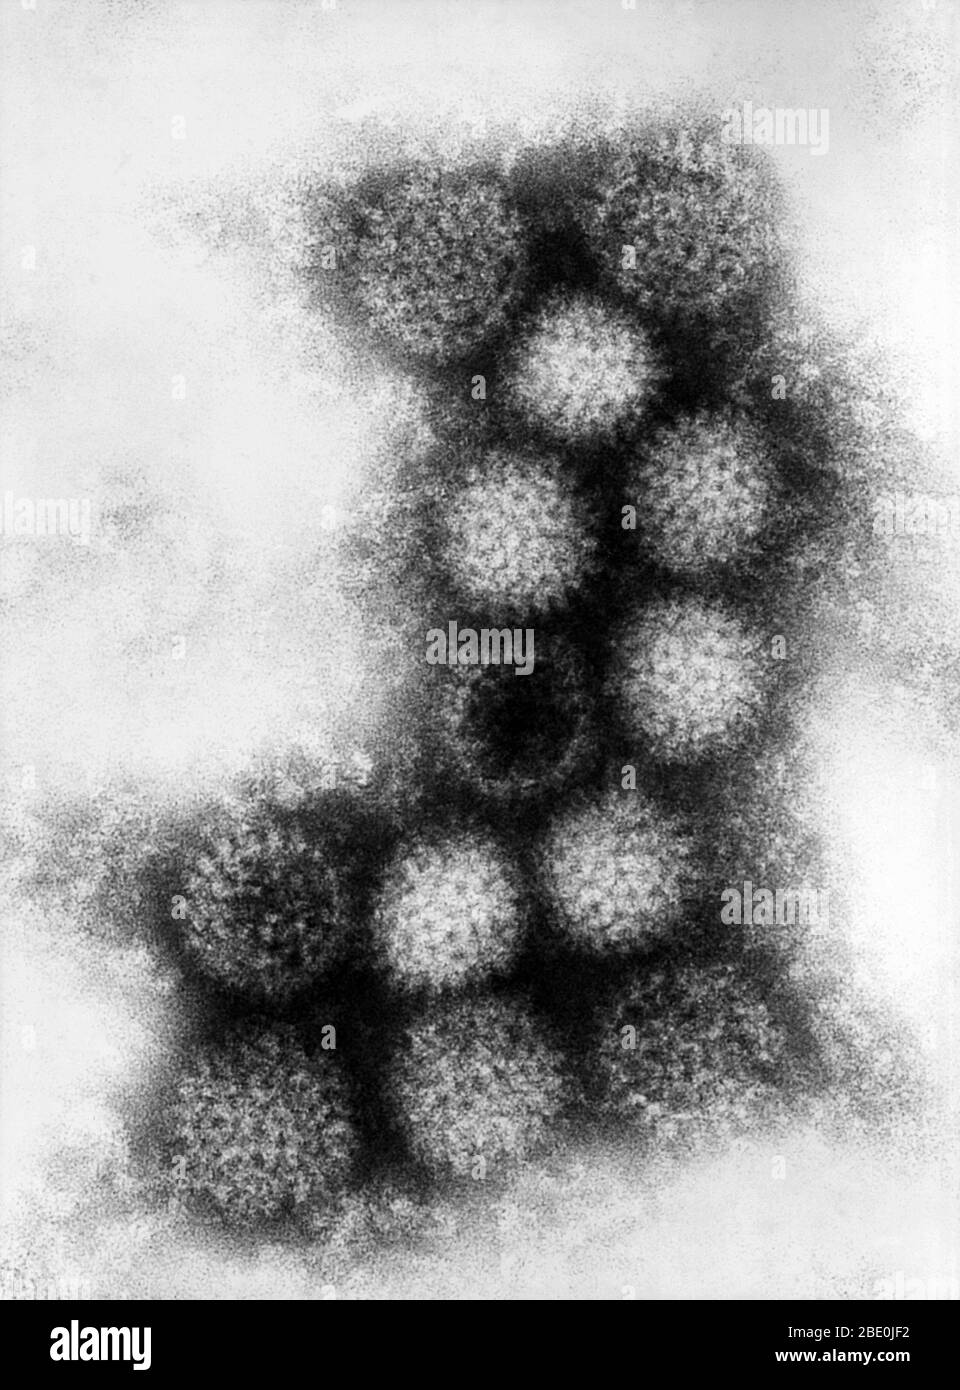 Transmission Electron Micrograph (TEM) reveals some of the morphologic details displayed by the Irituia strain of the Changuinola virus, a member of the genus, Orbiviruses, which is one of nine genera of the virus family known as the Reoviridae. The Changuinola virus inhabits Panama and northern South America. The Irituia virion, consists of a capsid, which is not enveloped, and which is spherical in shape, 60-80nm in diameter. The core consists of ten segments of double-stranded RNA. The Irituia virus has been classified as a Biosafety Level-2 pathogen. As an arbovirus, Changuinola virus is s Stock Photo